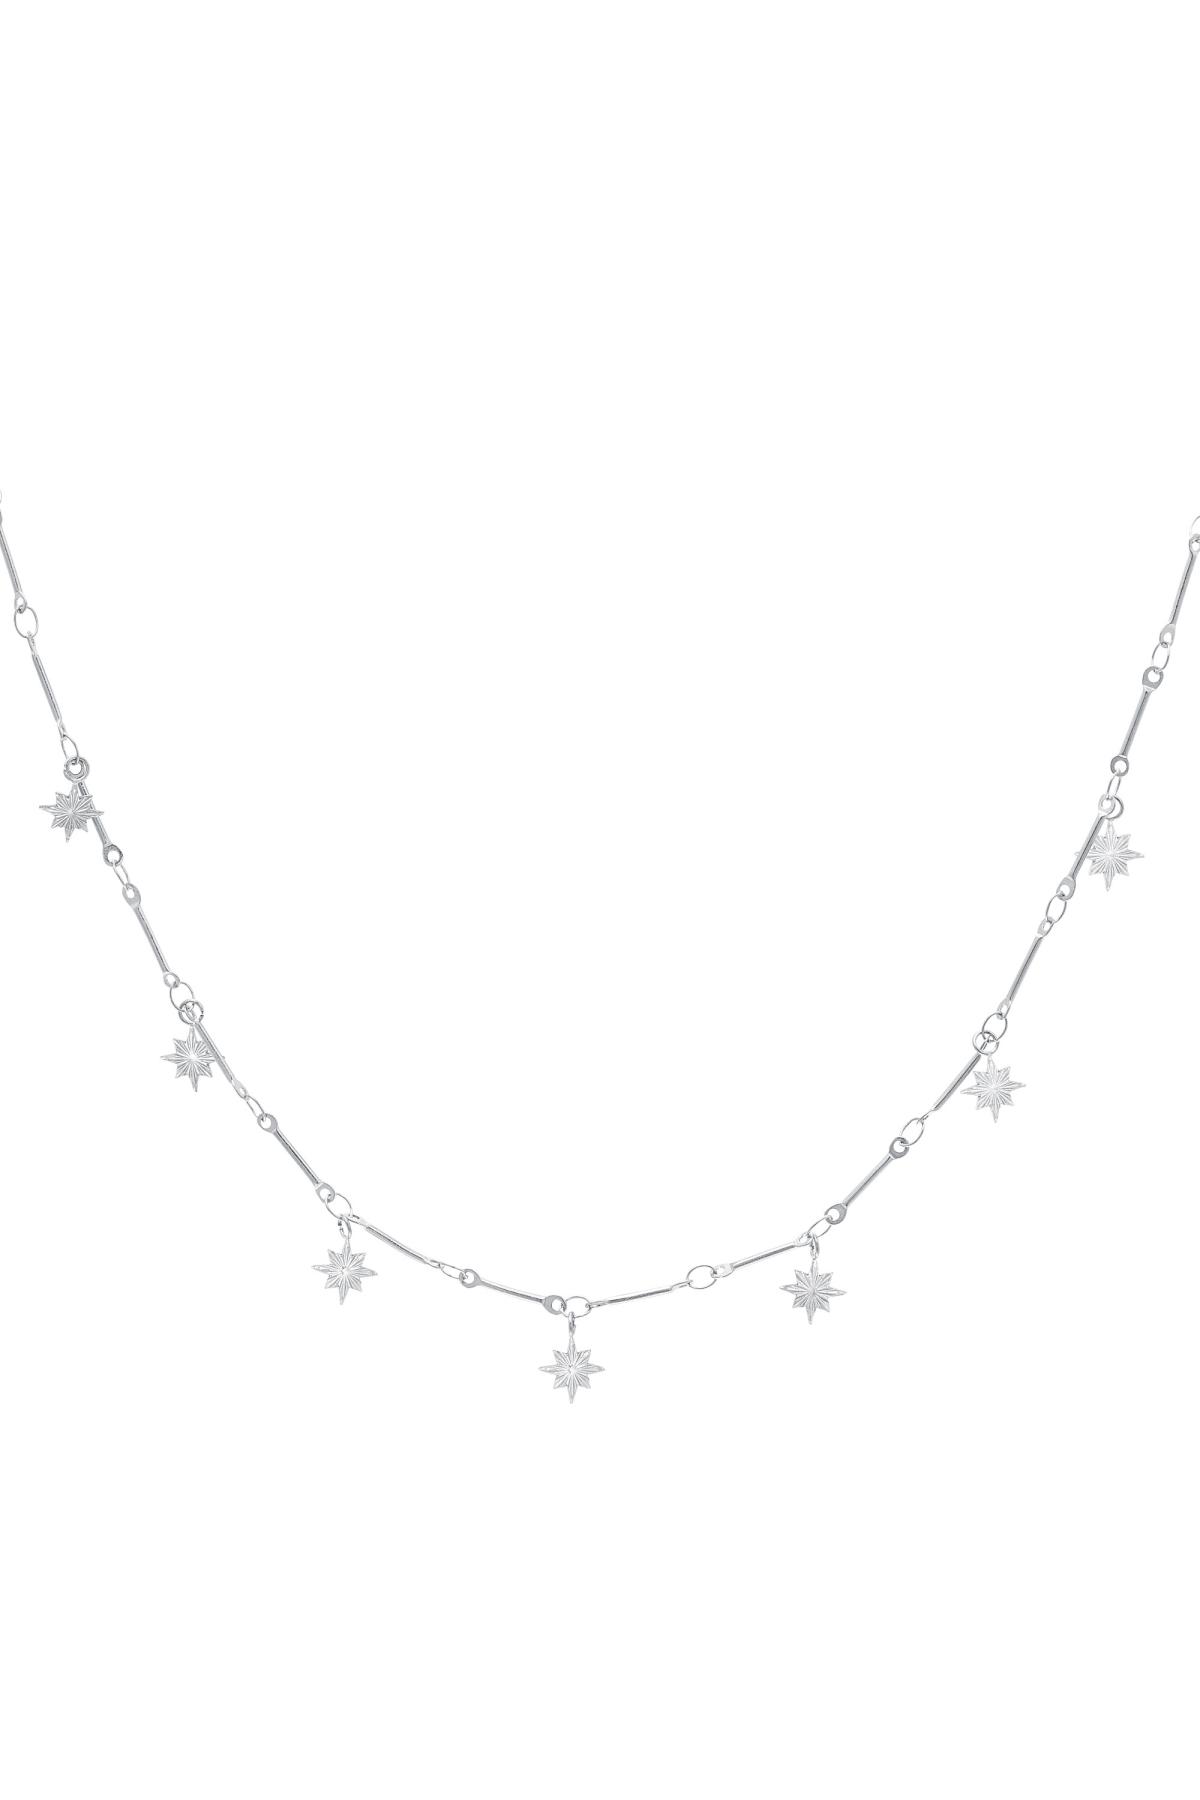 Collana Stella Polare Silver Stainless Steel